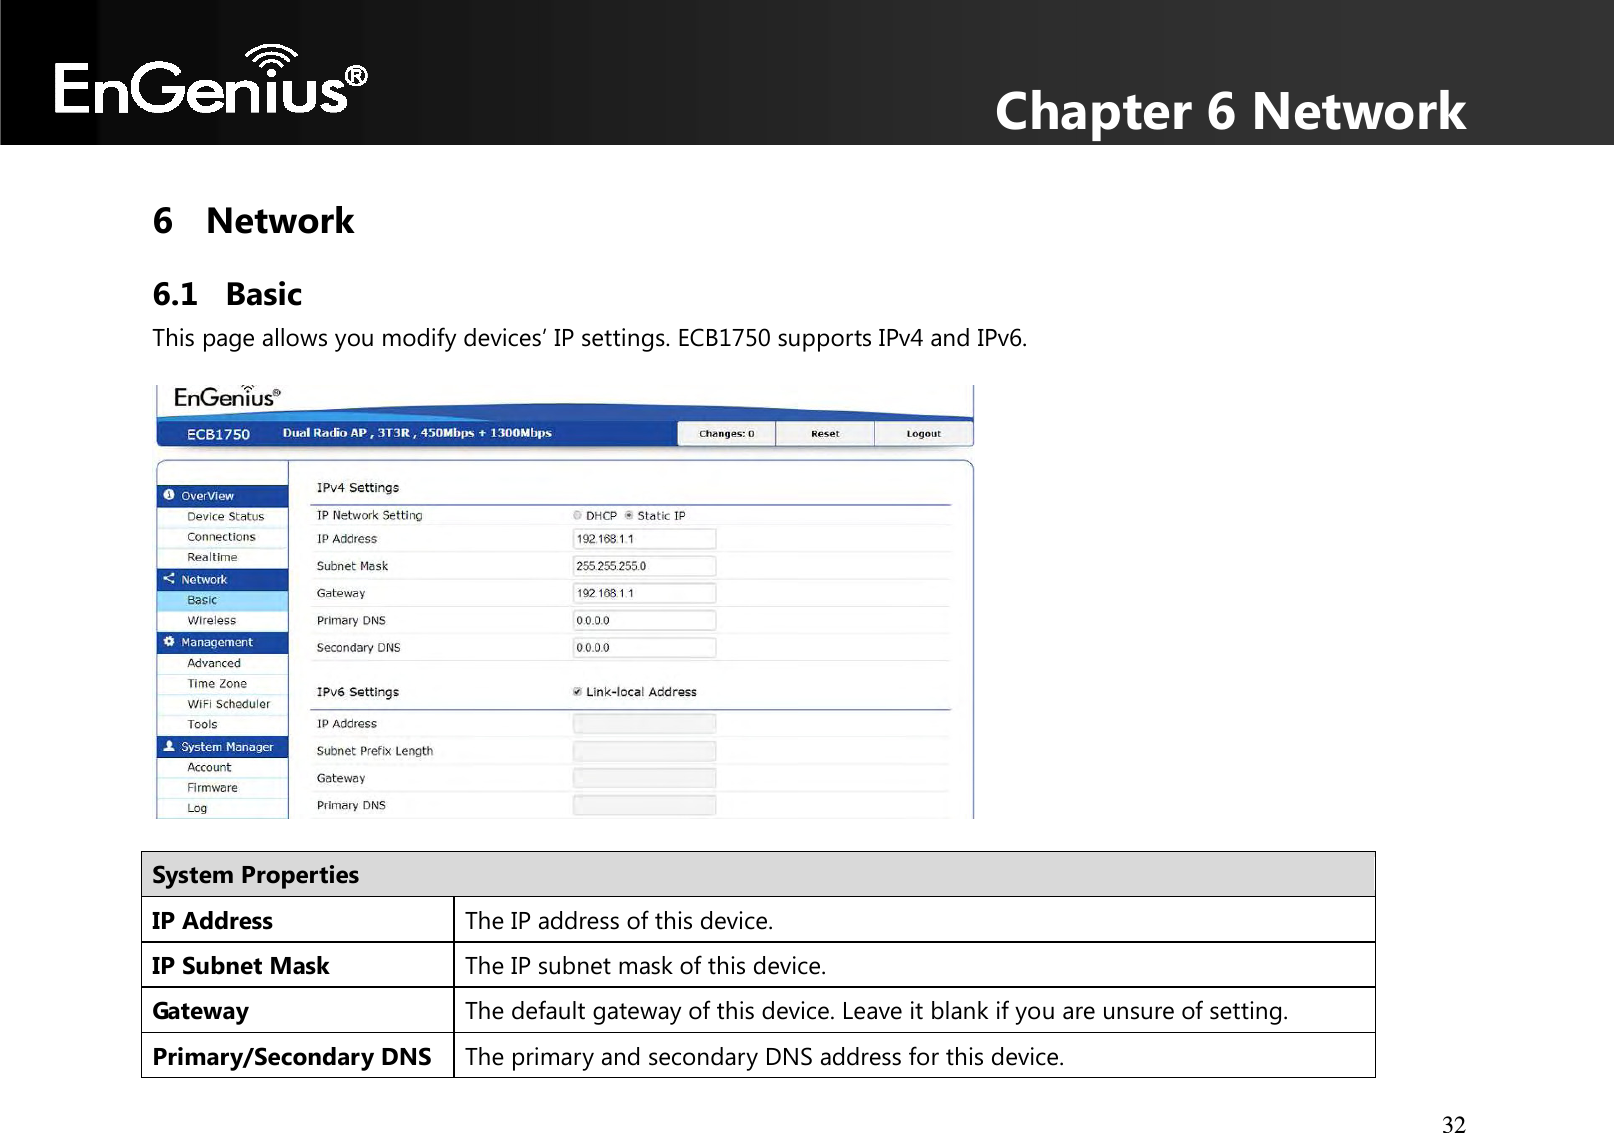 Chapter 6 Network 32  6 Network 6.1 Basic This page allows you modify devices’ IP settings. ECB1750 supports IPv4 and IPv6.    System Properties IP Address  The IP address of this device. IP Subnet Mask The IP subnet mask of this device. Gateway The default gateway of this device. Leave it blank if you are unsure of setting. Primary/Secondary DNS  The primary and secondary DNS address for this device. 